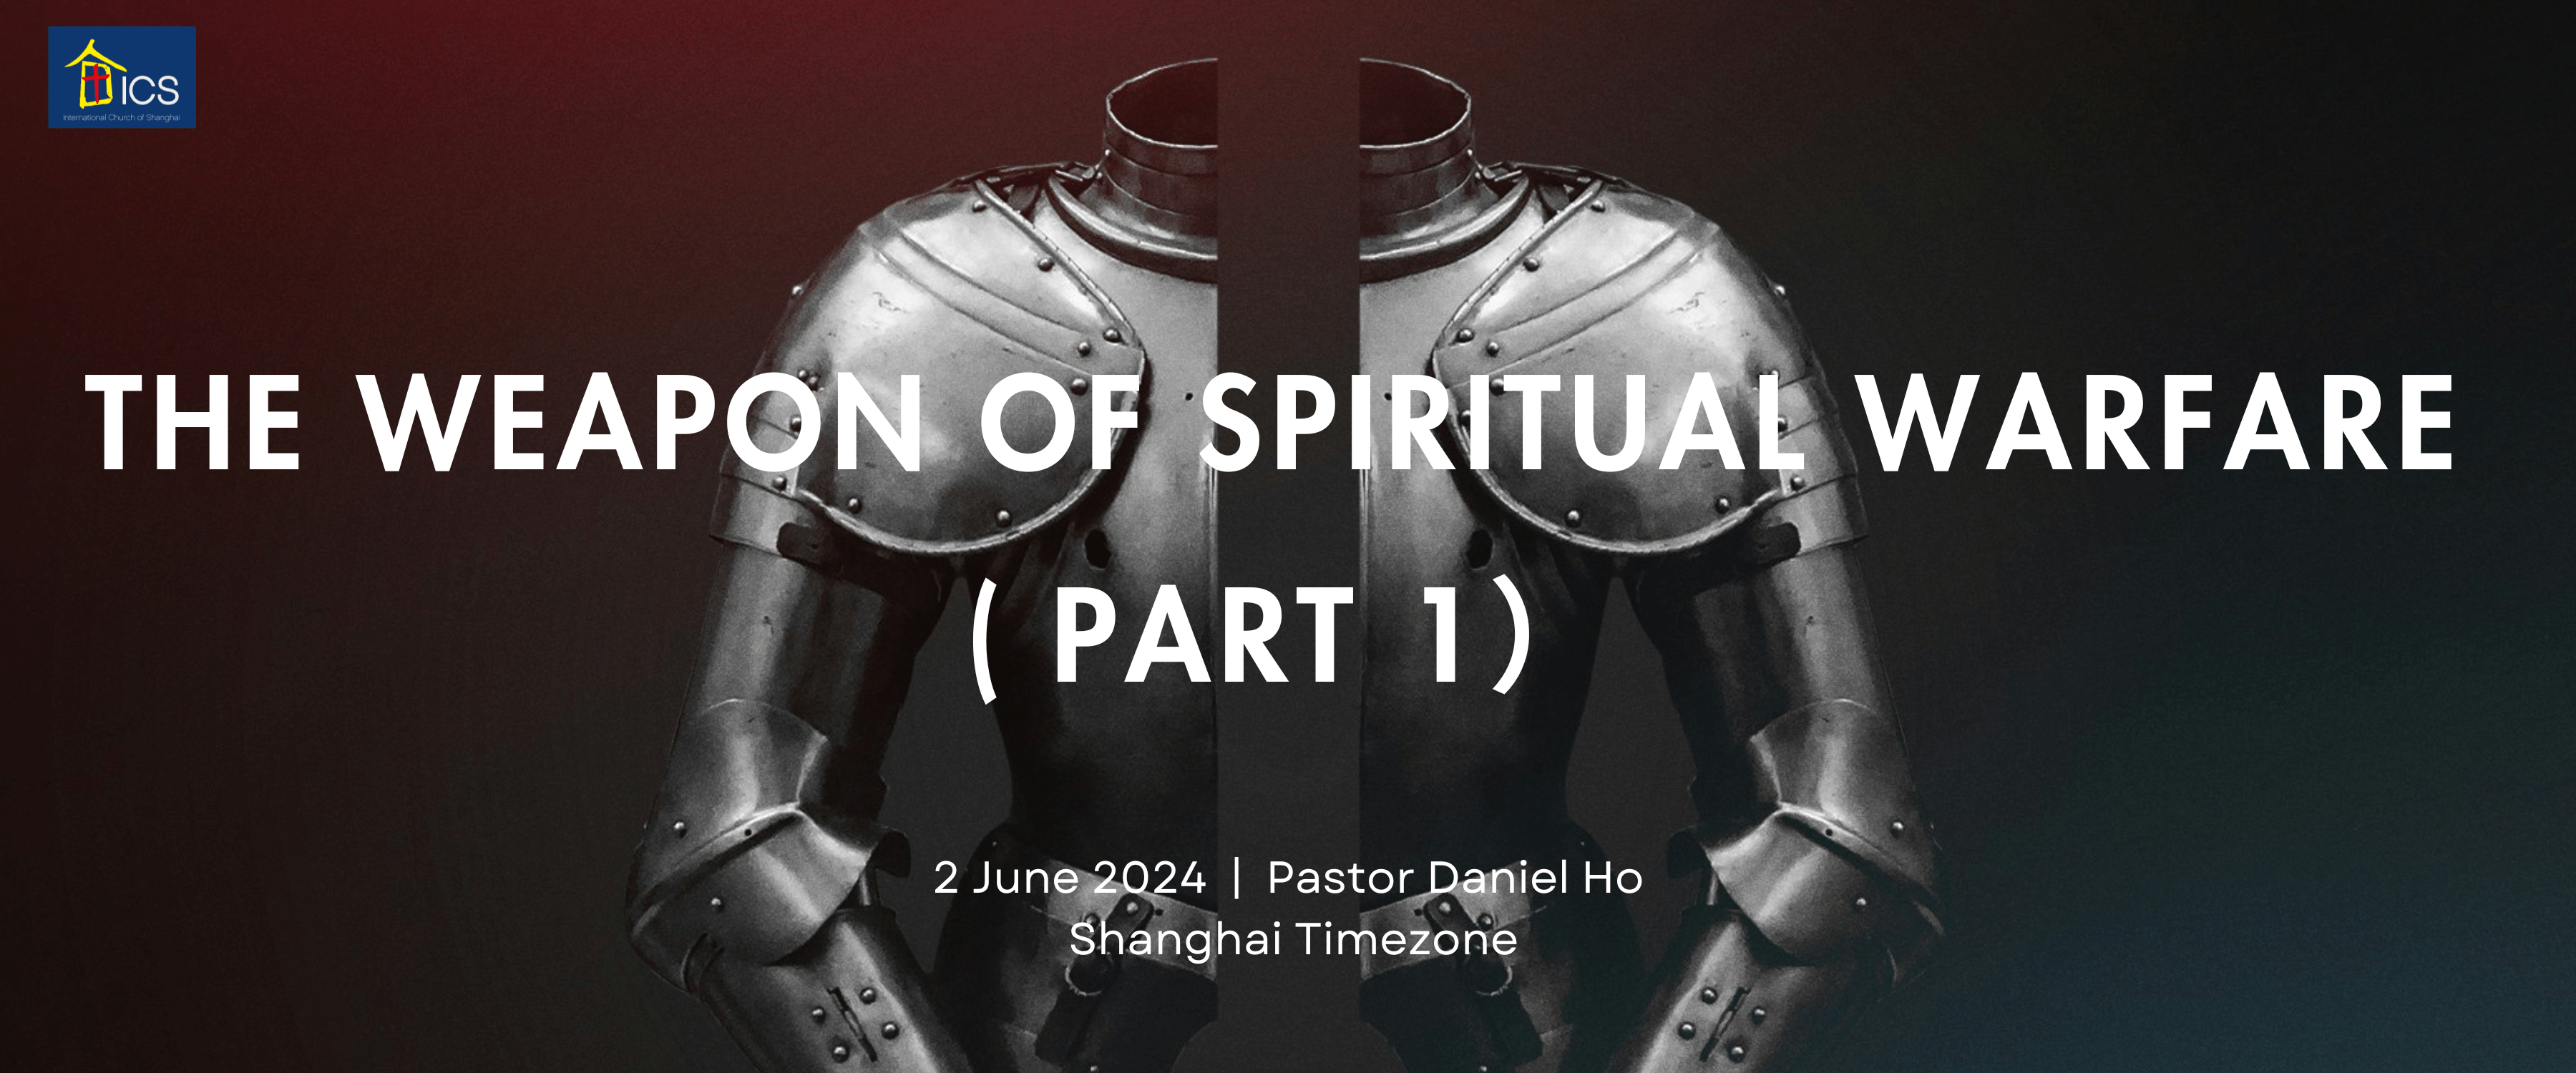 THE WEAPON OF OUR SPIRITUAL WARFARE (PART 1)